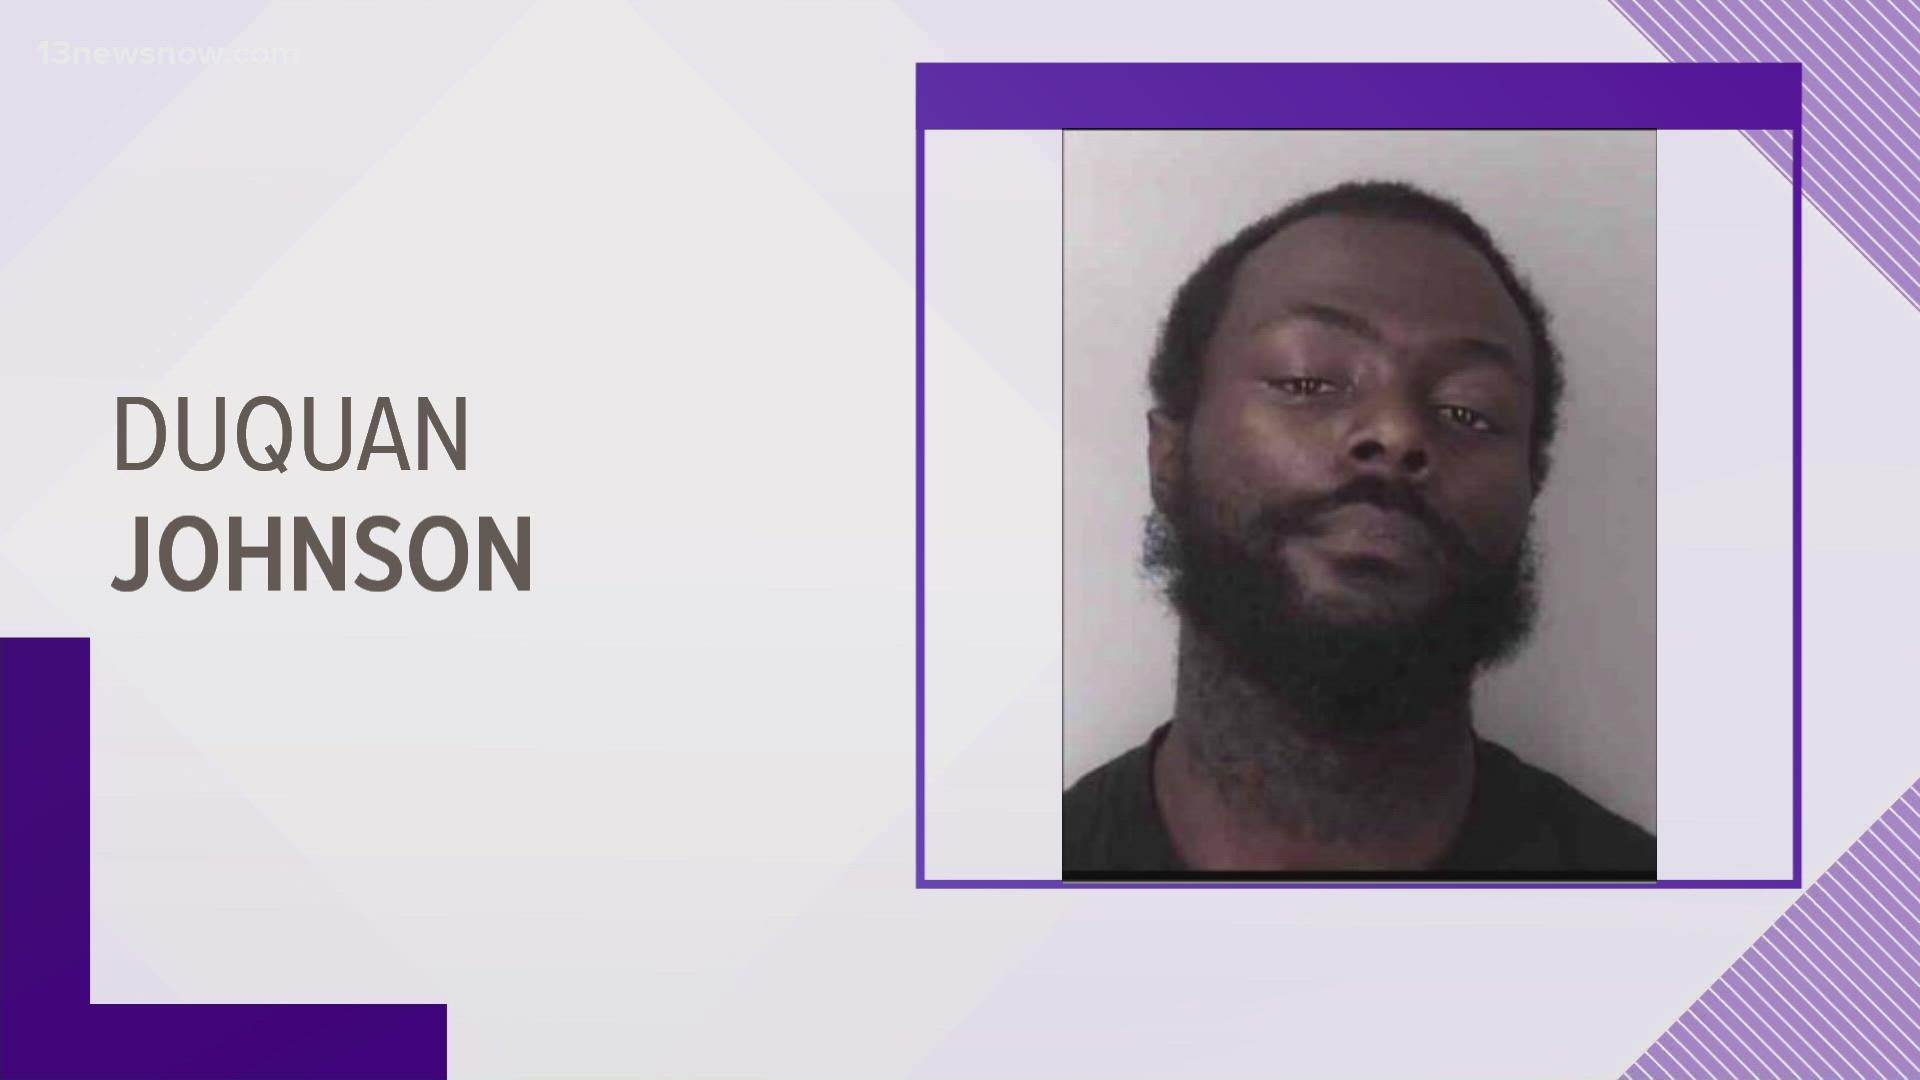 Officers said there are charges on file against Duquan Johnson, 27. Police said he shot and killed two people in September 2021.